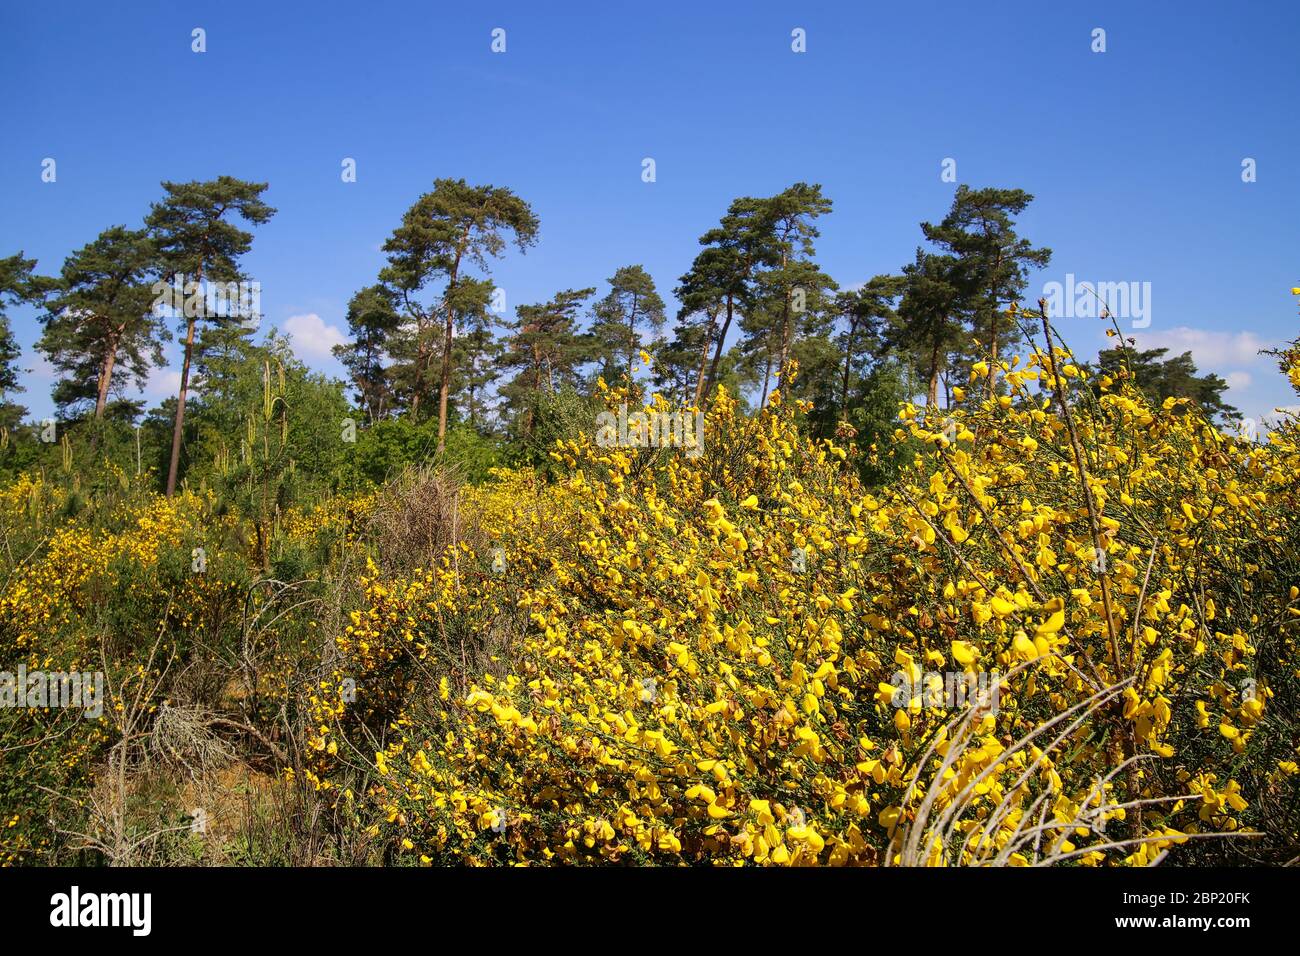 View on yellow blooming brooms bushes (genista pilosa) in dutch heath landscape with scots pine trees (pinus sylvestris) against blue sky - Swalmen, N Stock Photo